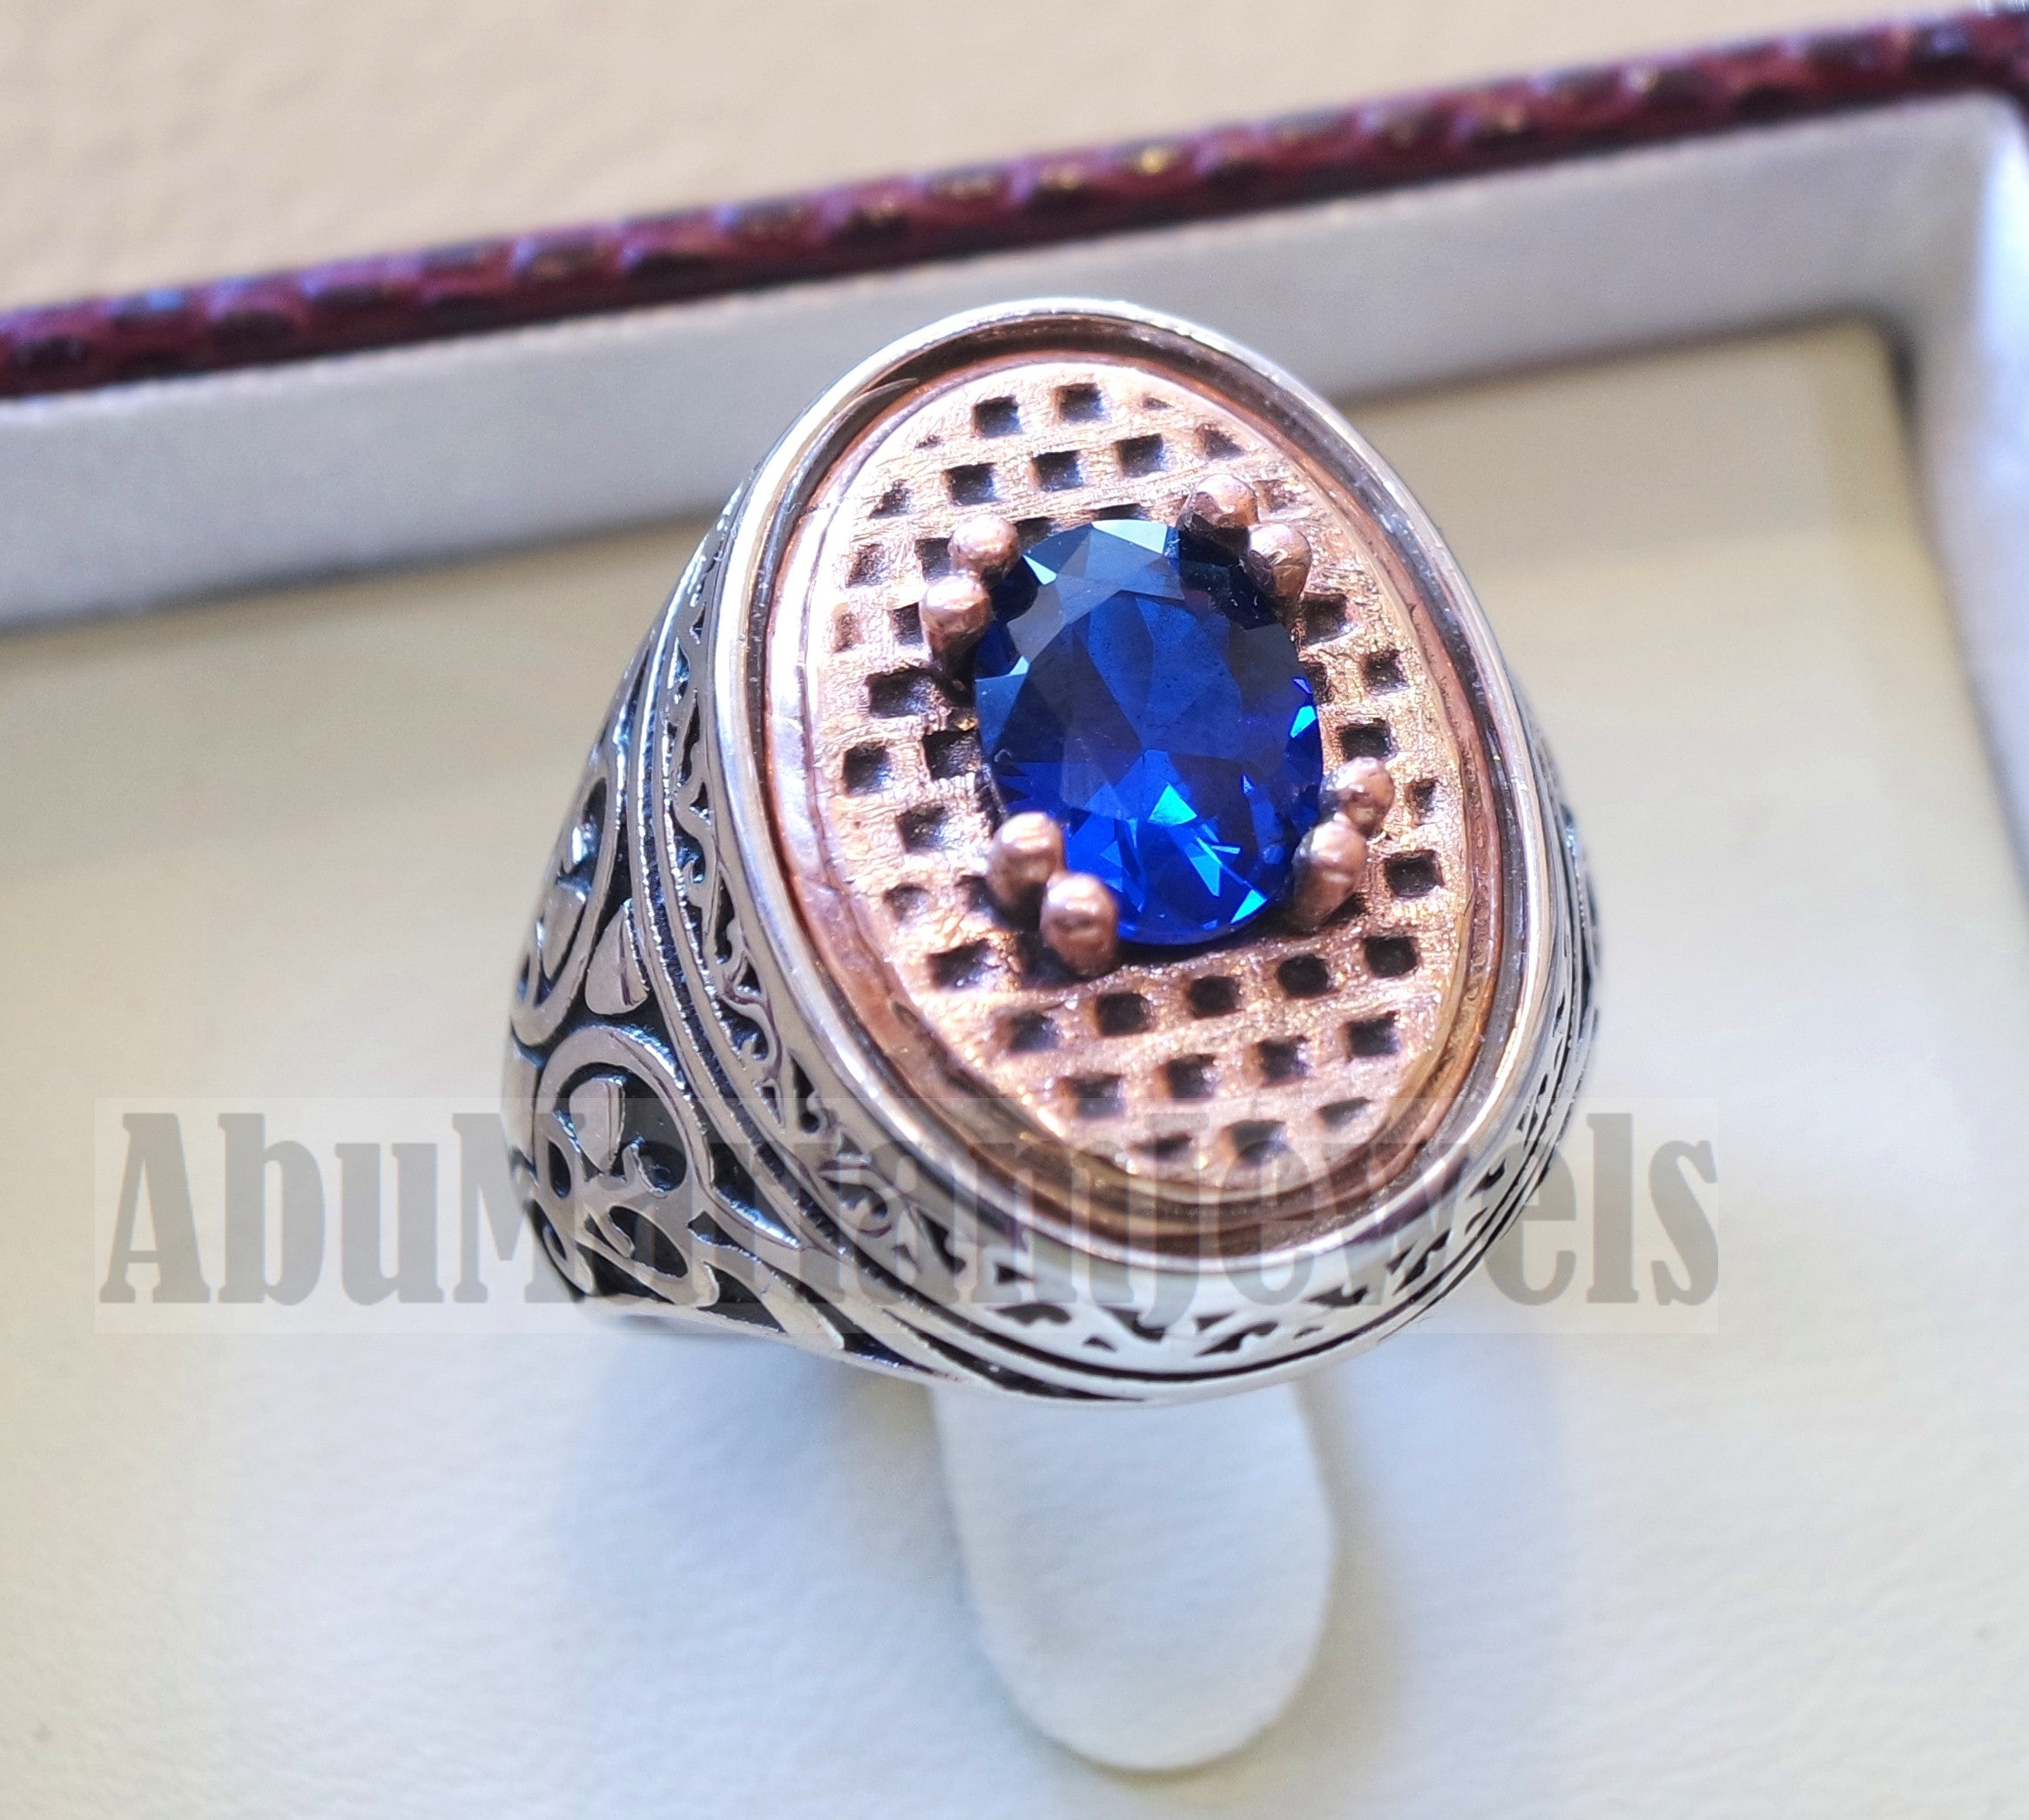 sapphire ring synthetic spinel stone identical to genuine gem men ring sterling silver 925 bronze frame gemstone any size jewelry